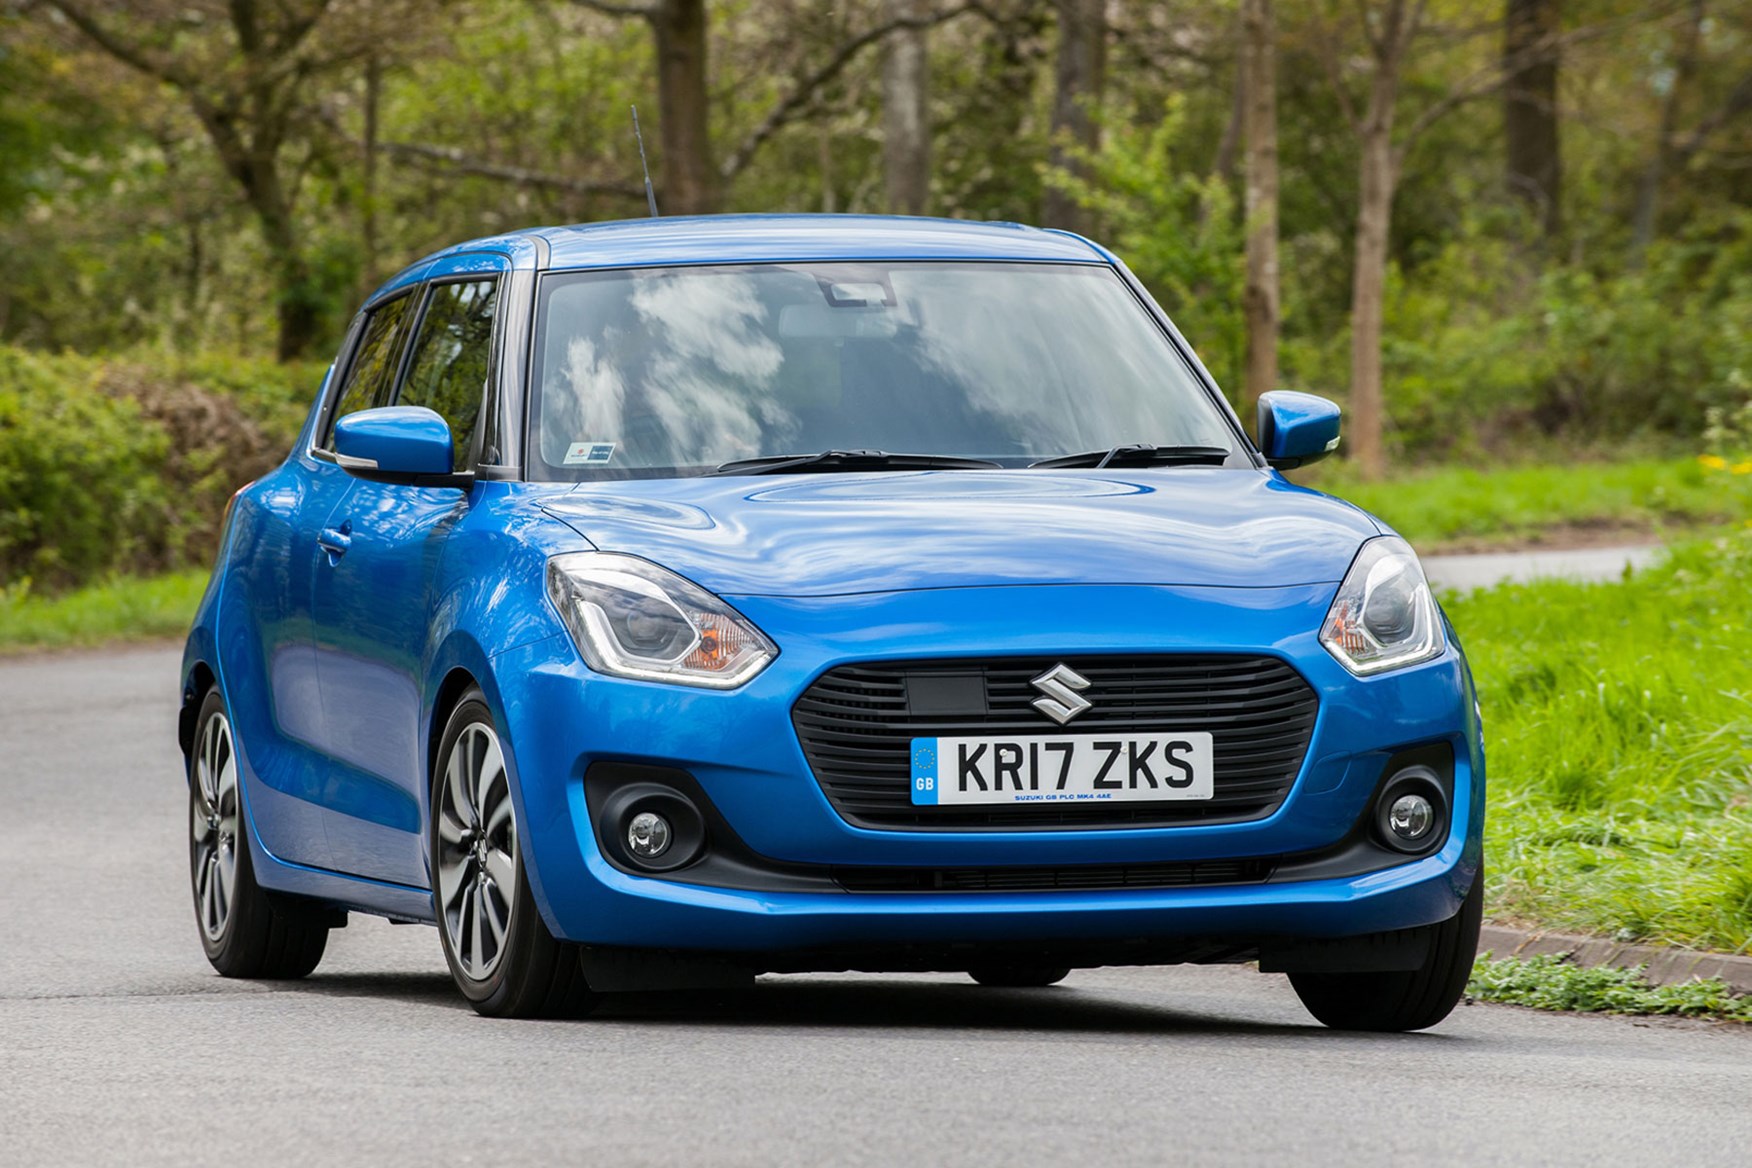 Suzuki Is One Of The Few Car Companies To Offer No Deposit 0 Interest Deals For As Little 149 A Month You Could Bag Swift Supermini Over 48